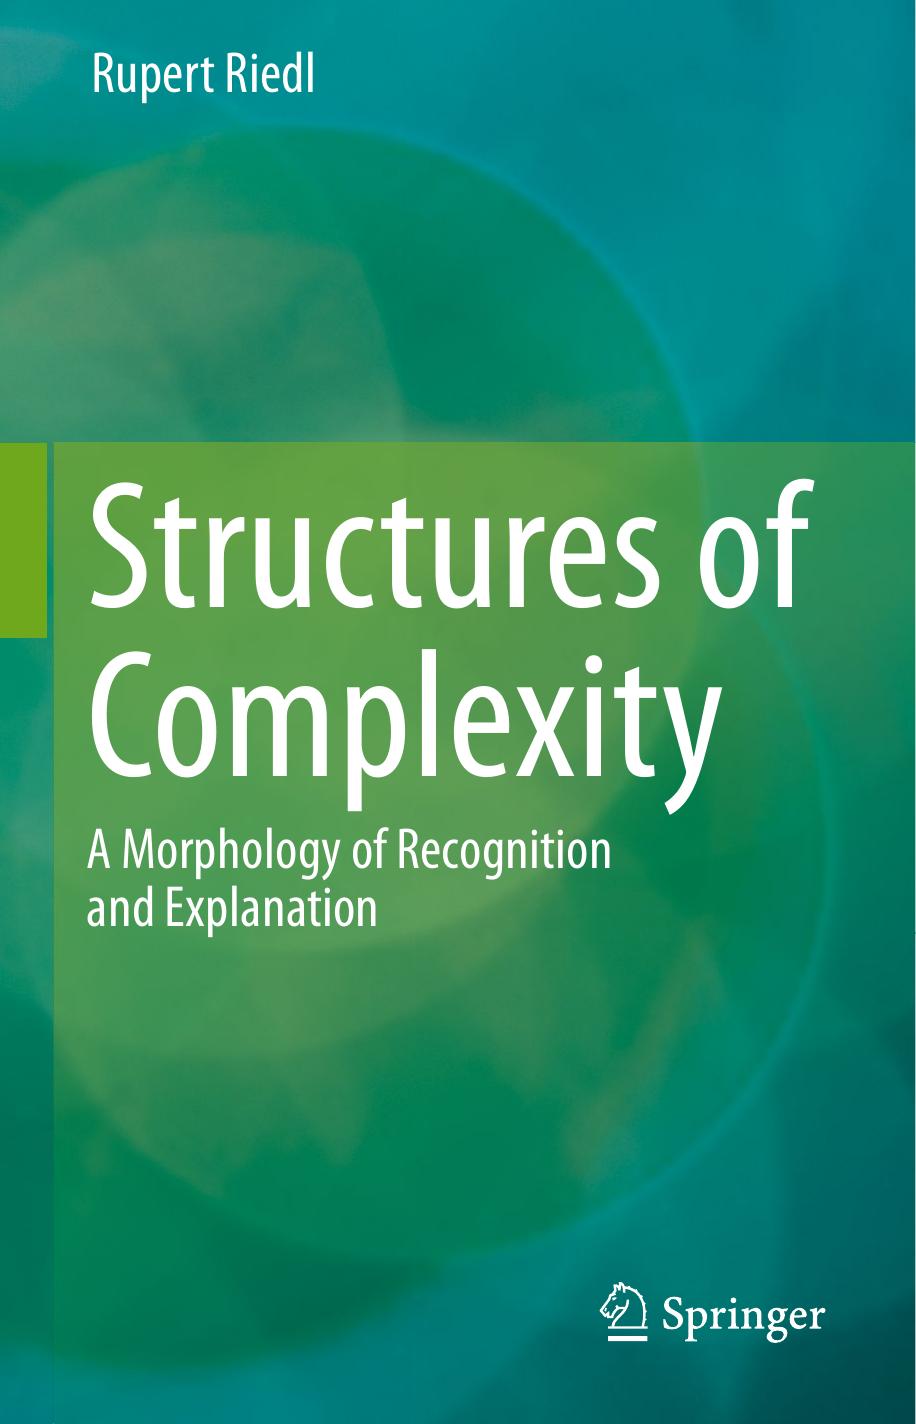 Structures of Complexity: A Morphology of Recognition and Explanation